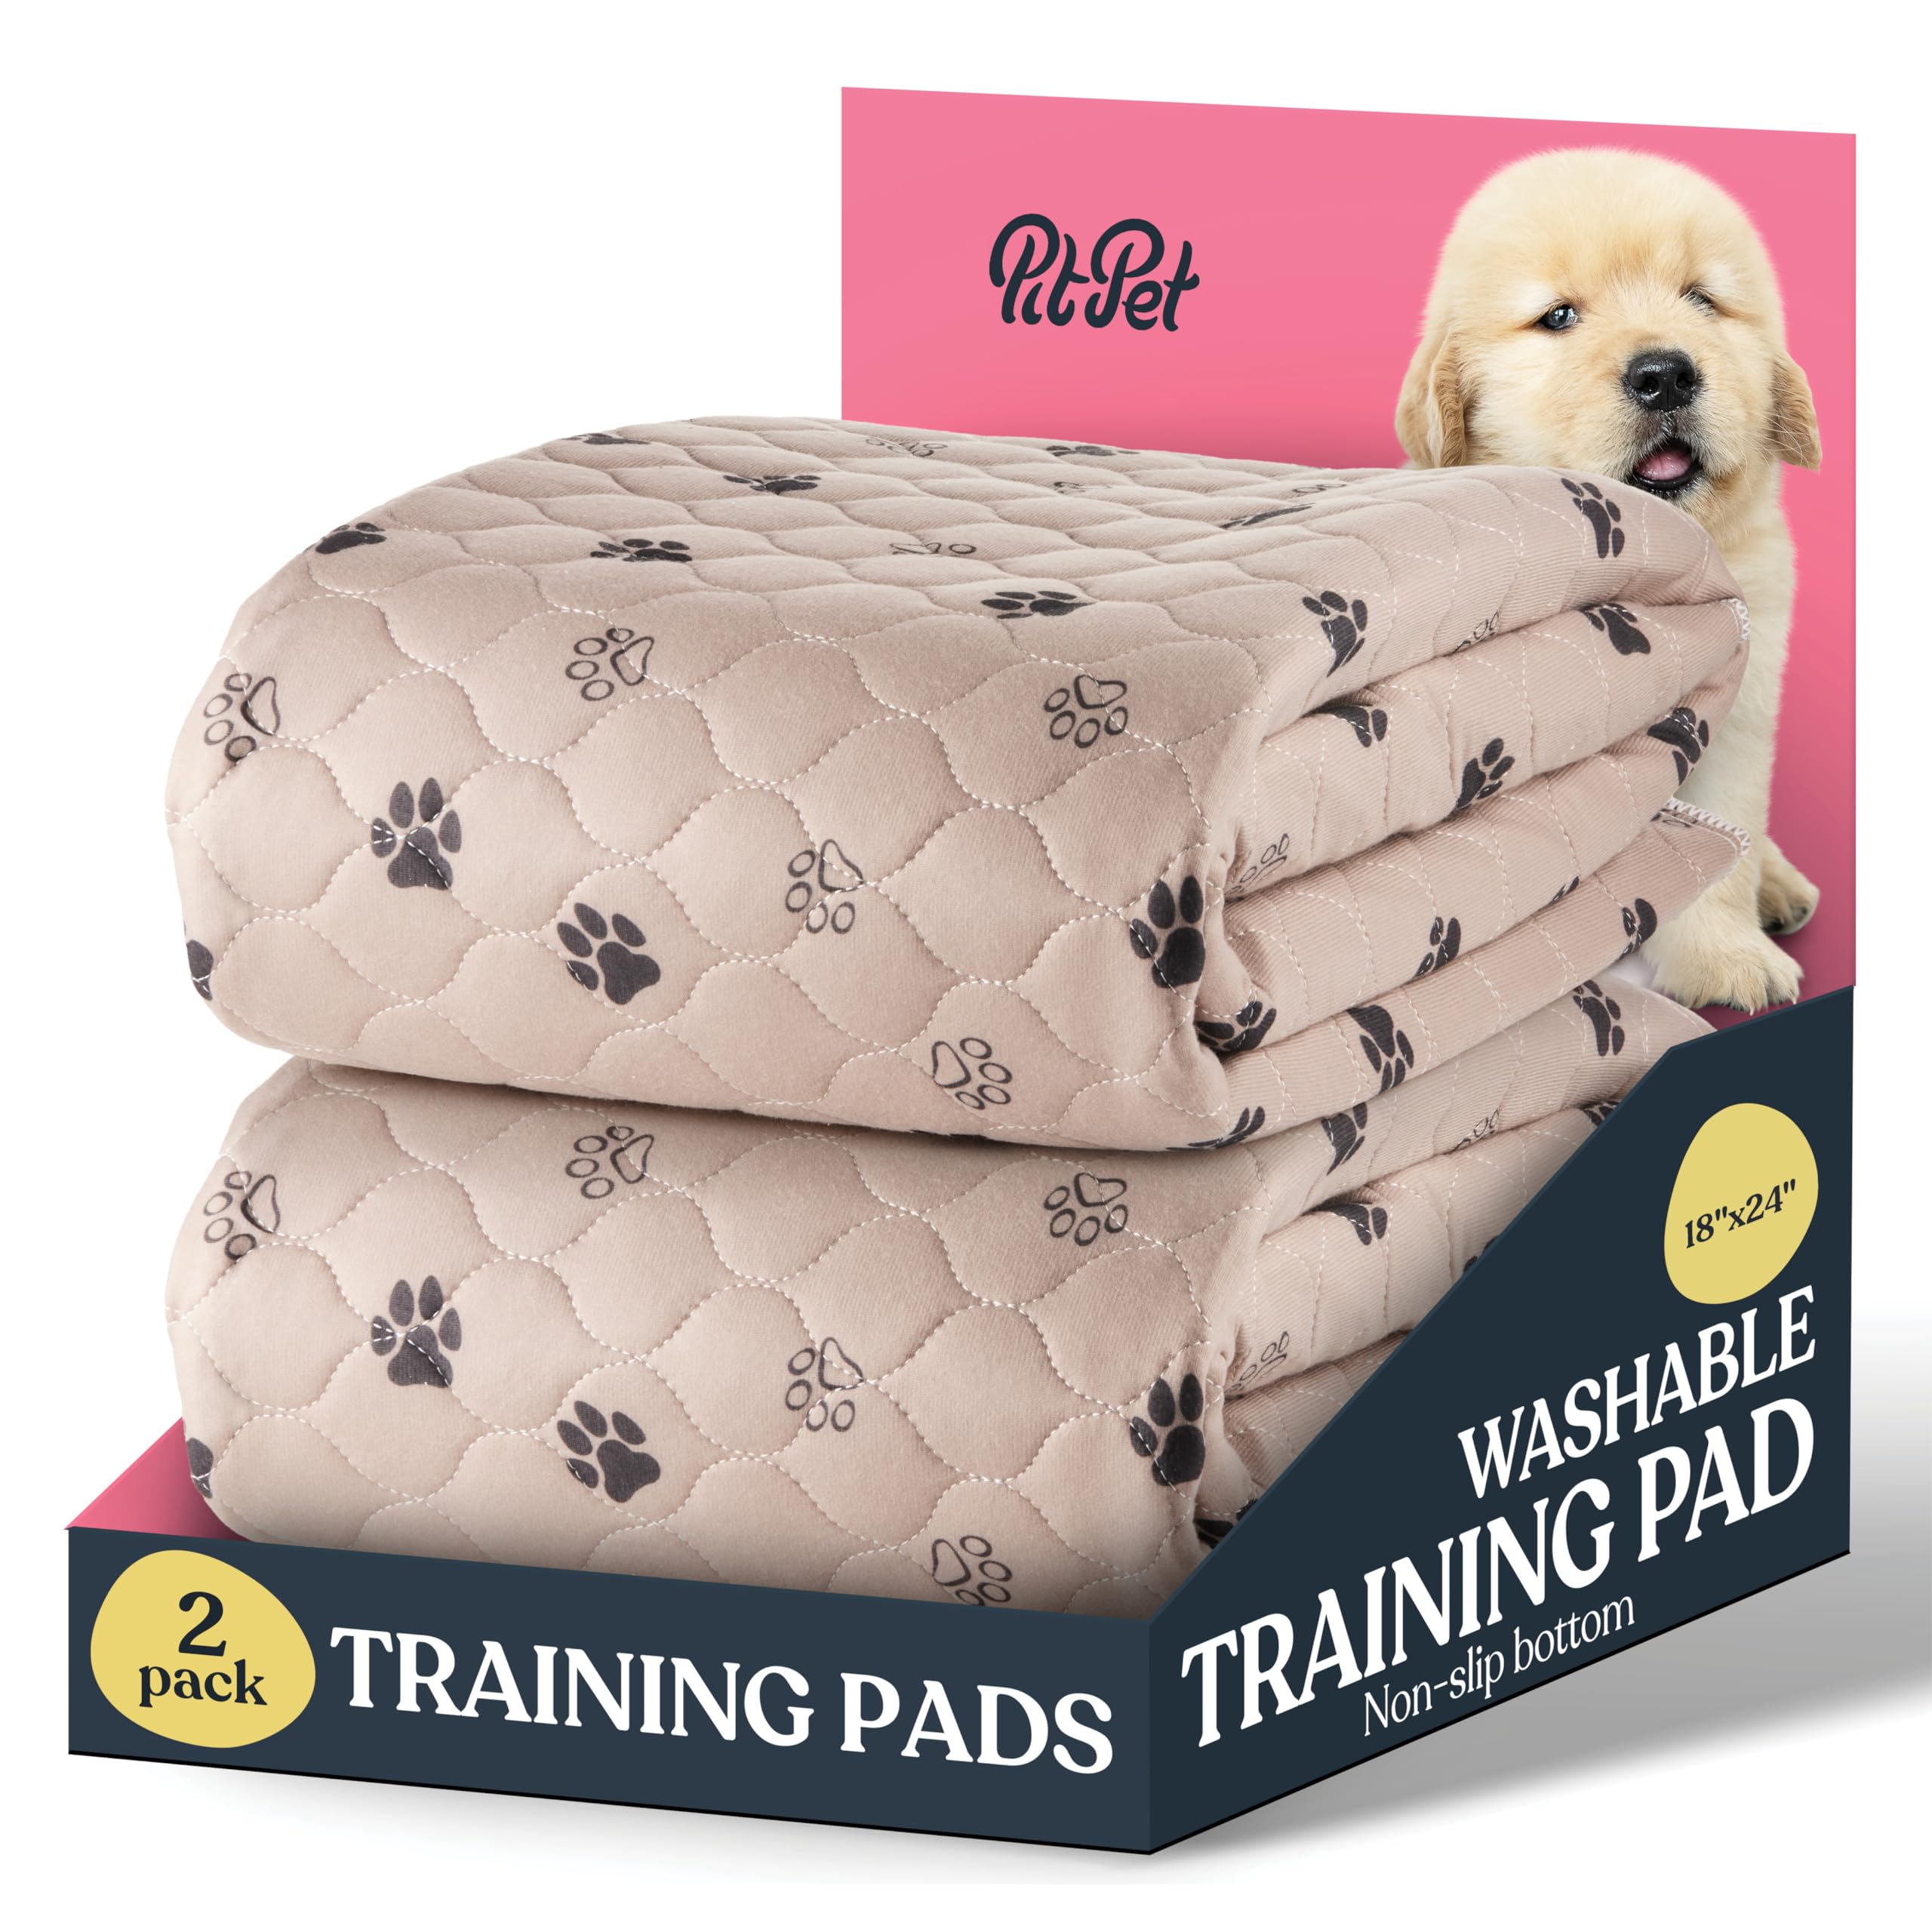 Super Absorbent Washable Pee Pads for Dogs - 2-Pack Superior Reusable Puppy Pads Pet Training Pads –100% Waterproof Dog Pee Pad Protects Against Urine Leakage Non-Slip Grip Prevents Slipping& Bunching  - Like New